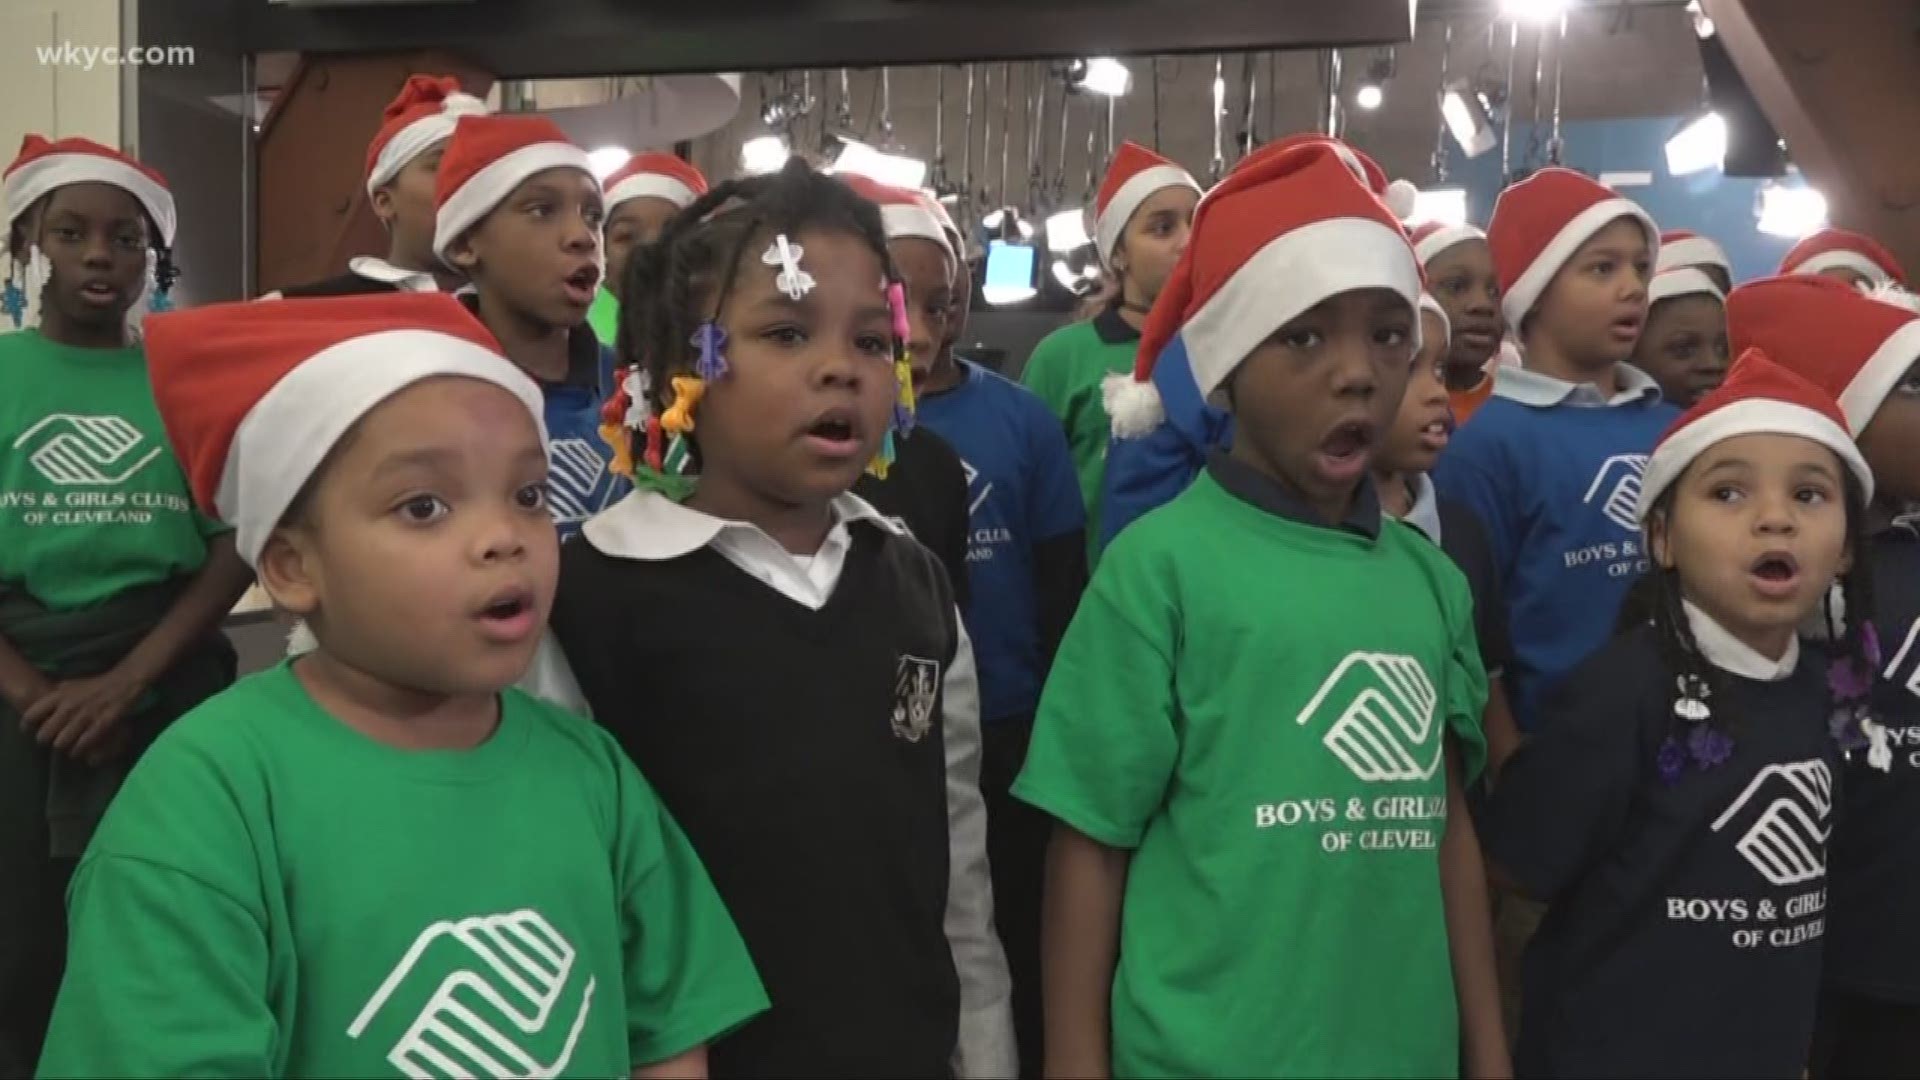 The Boys & Girls Clubs of Cleveland choir spread some holiday cheer in the WKYC newsroom.